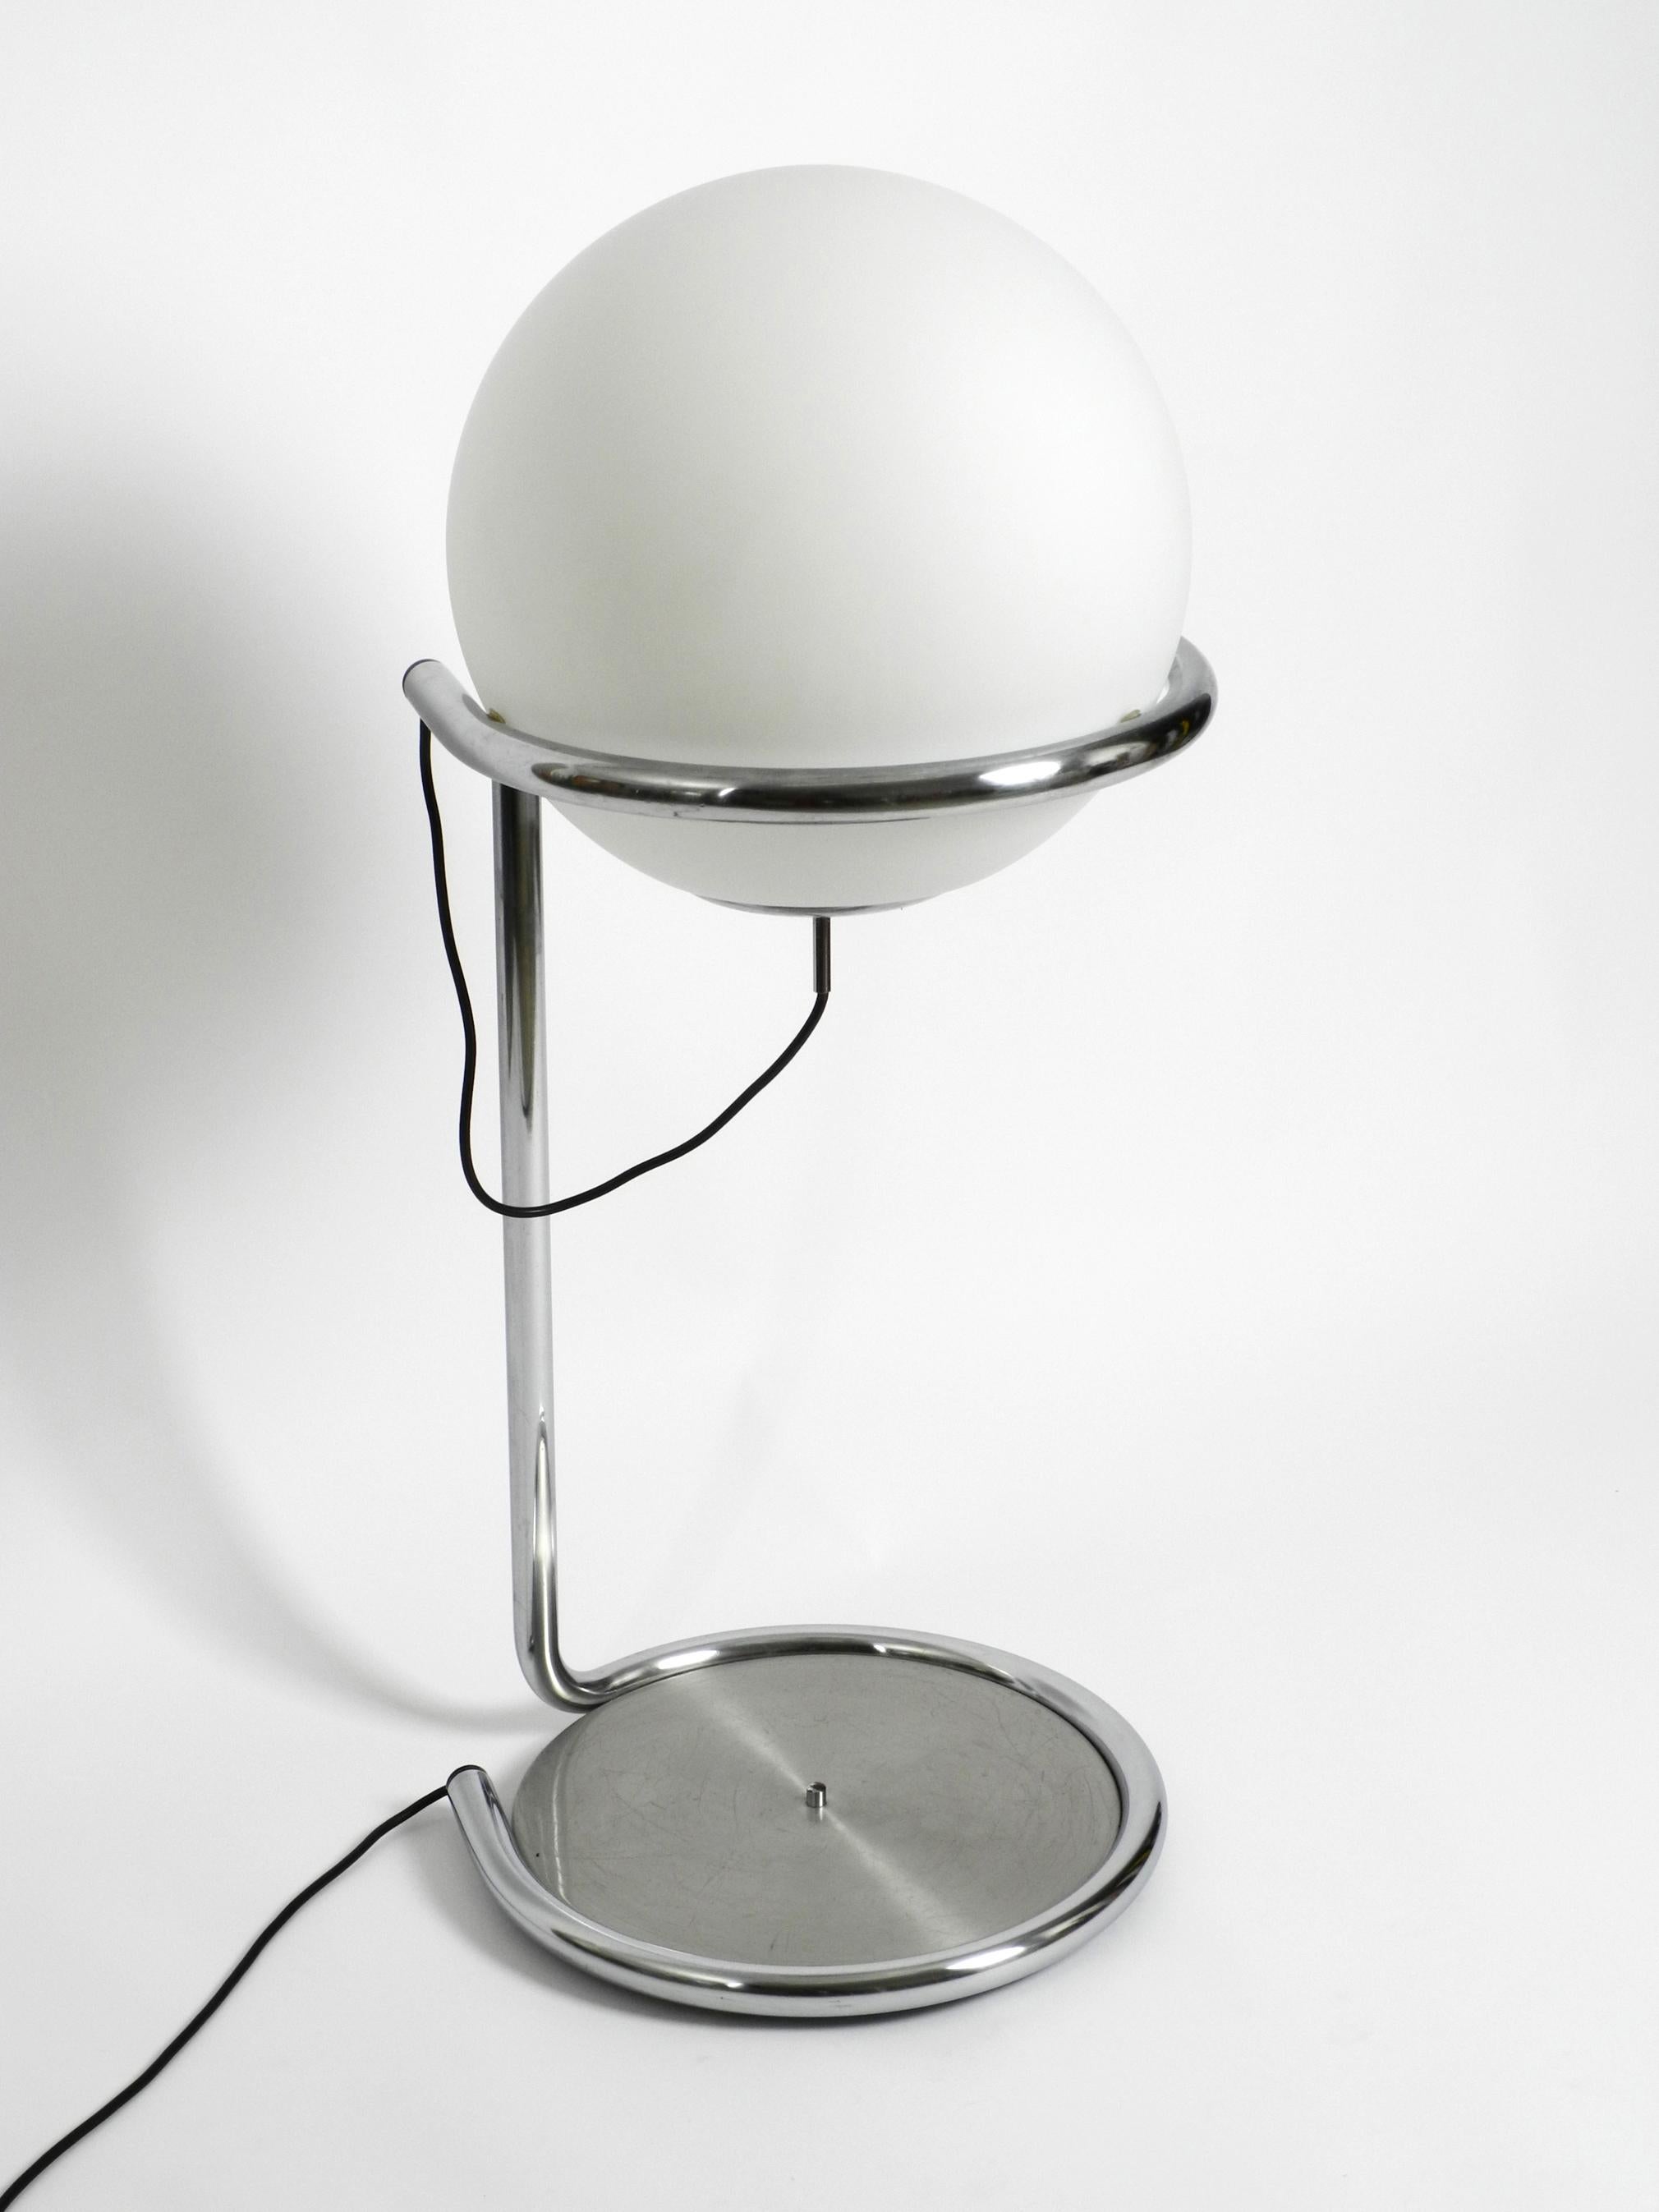 Rare beautiful large heavy chrome-plated tubular steel floor 
lamp with large glass ball shade. Great Space Age design from the 1960s.
Very high quality. Manufacturer unknown.
The entire frame consists of a curved 3 cm thick chromed metal